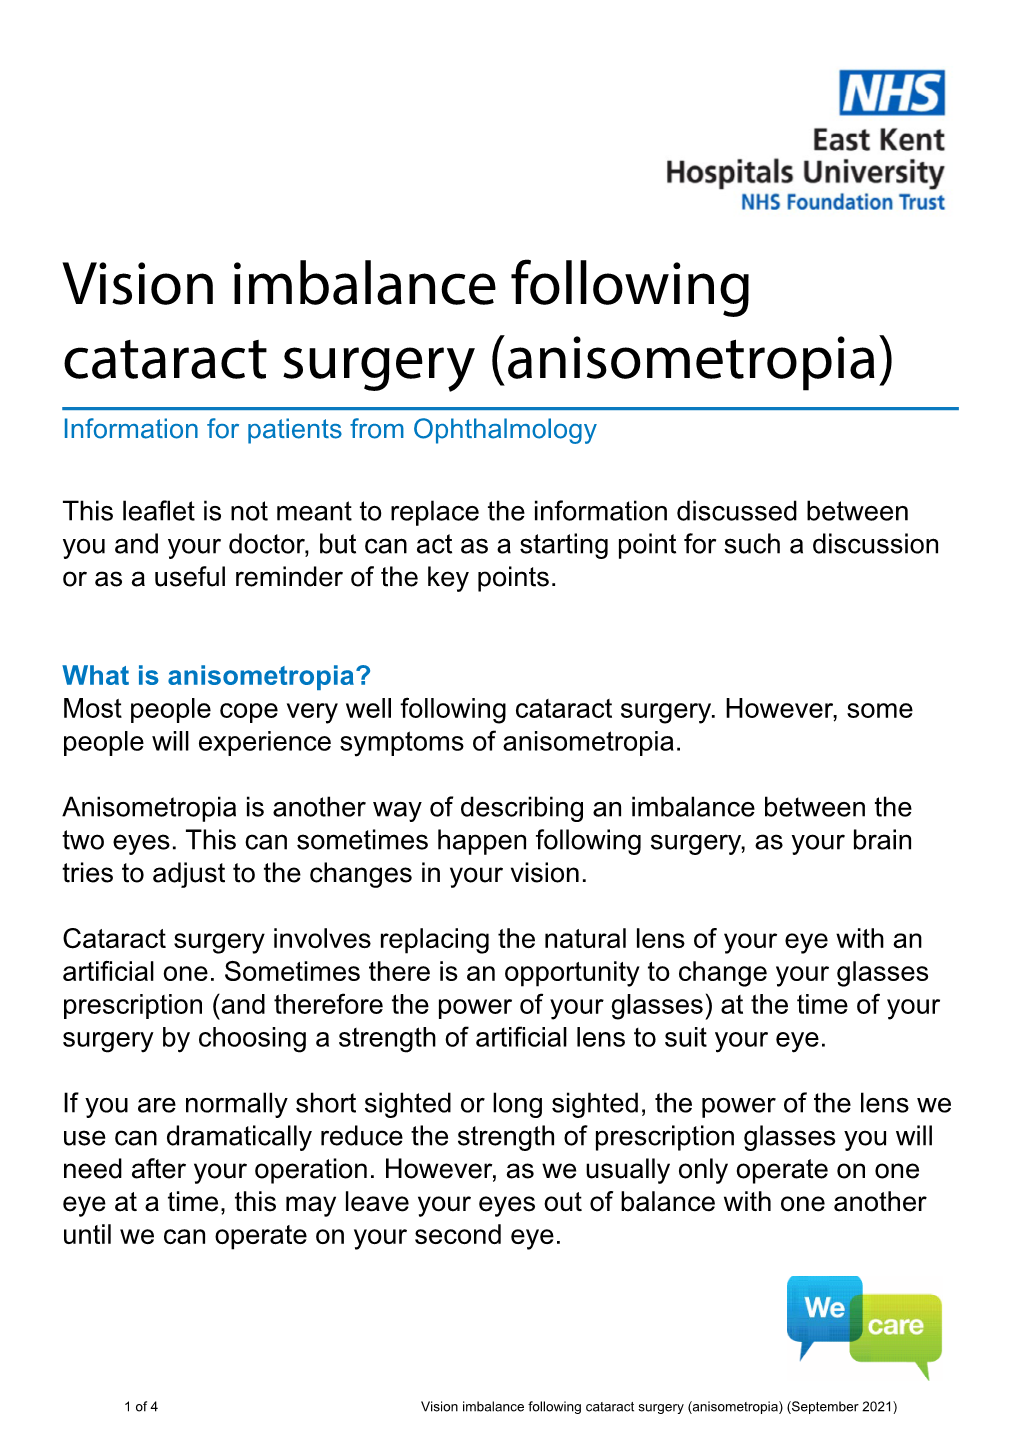 Vision Imbalance Following Cataract Surgery (Anisometropia) Information for Patients from Ophthalmology